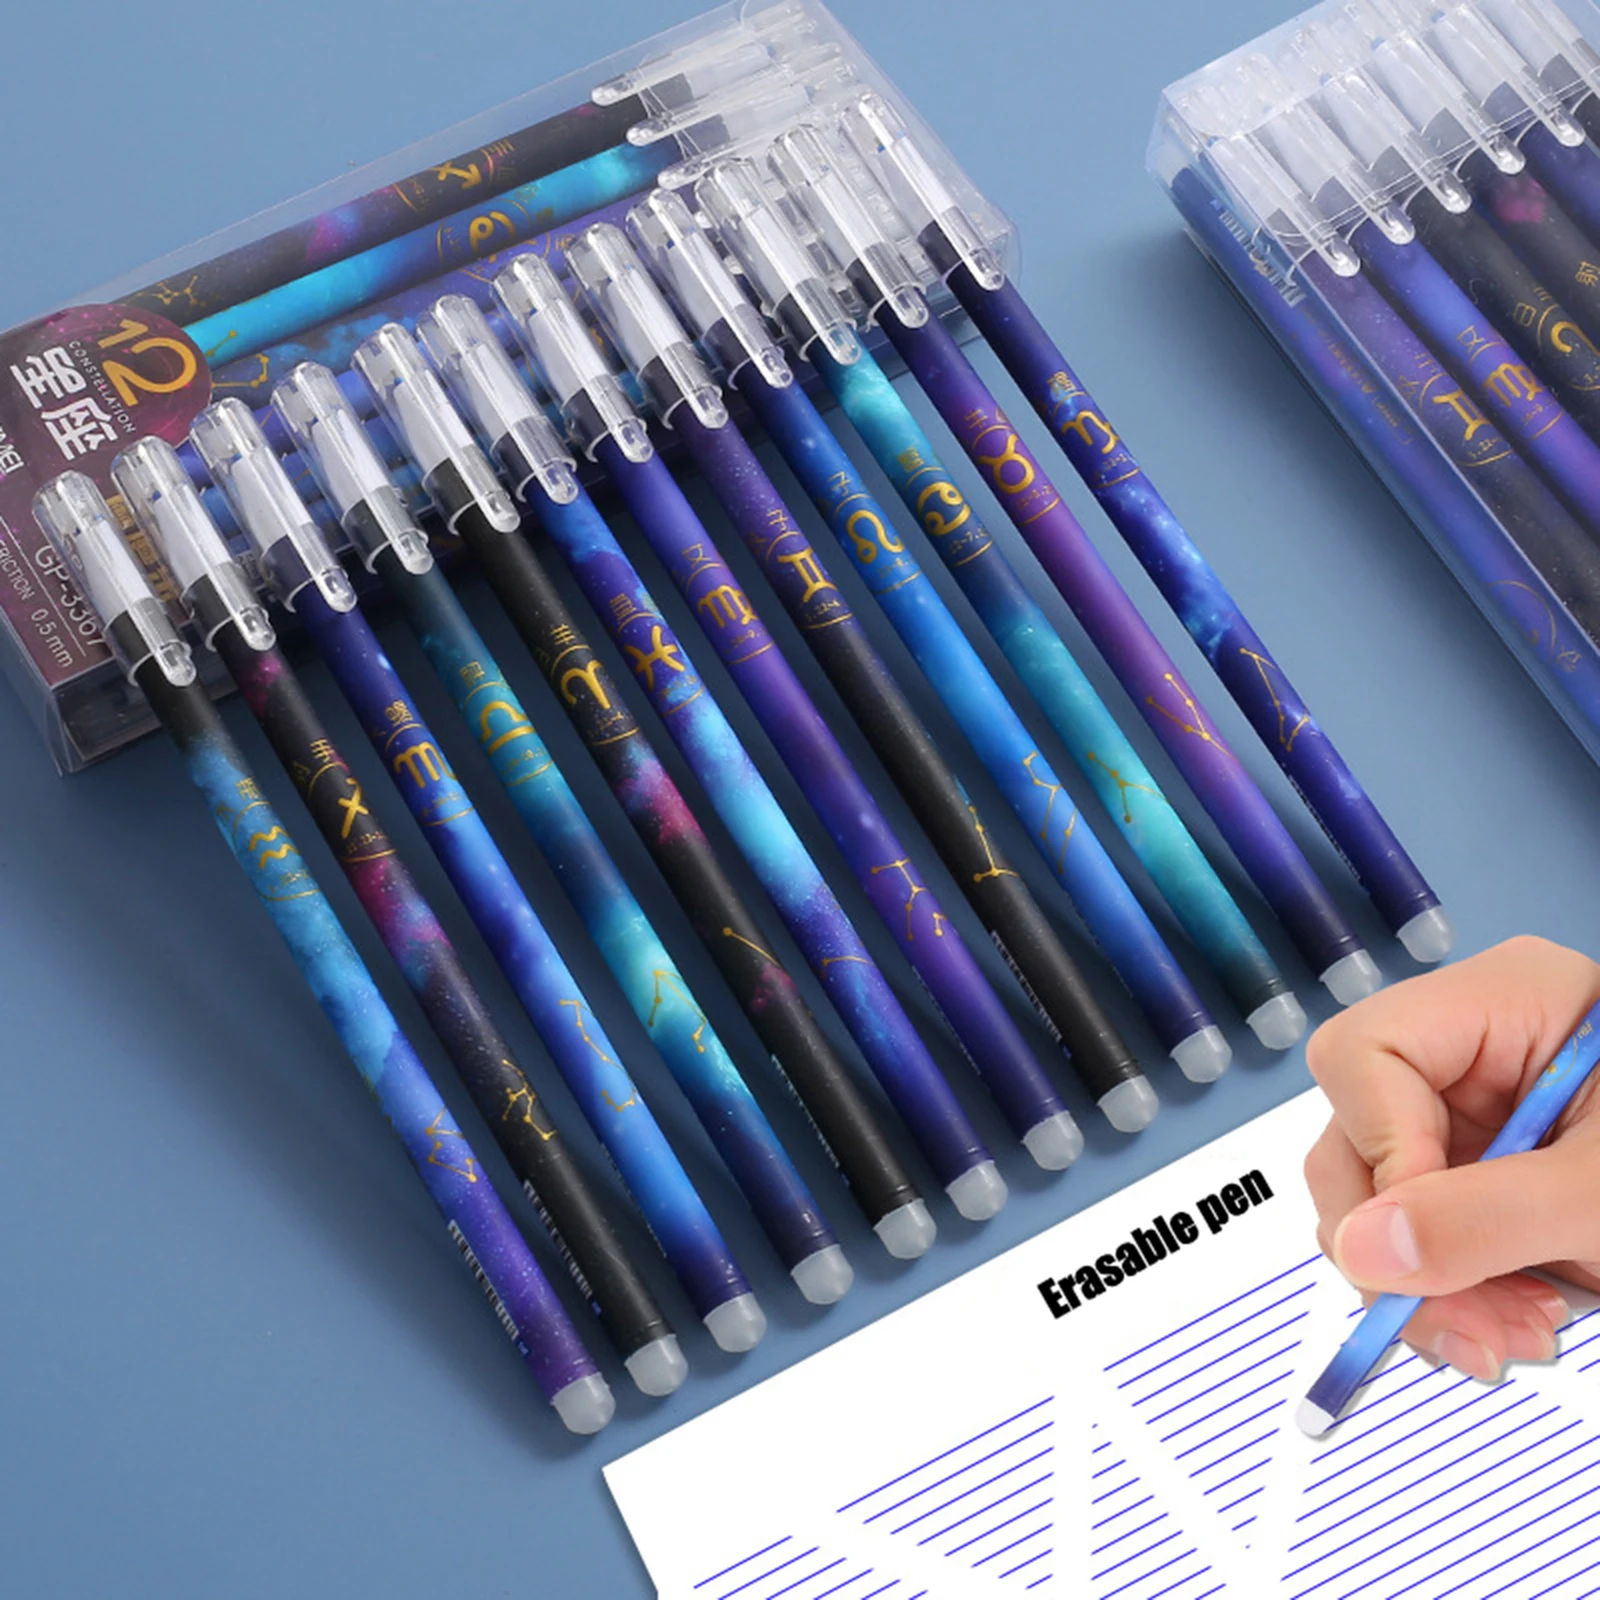 12 Pack Constellation Erasable Gel Ink Pens, 5mm Fine Point Writing Pens for